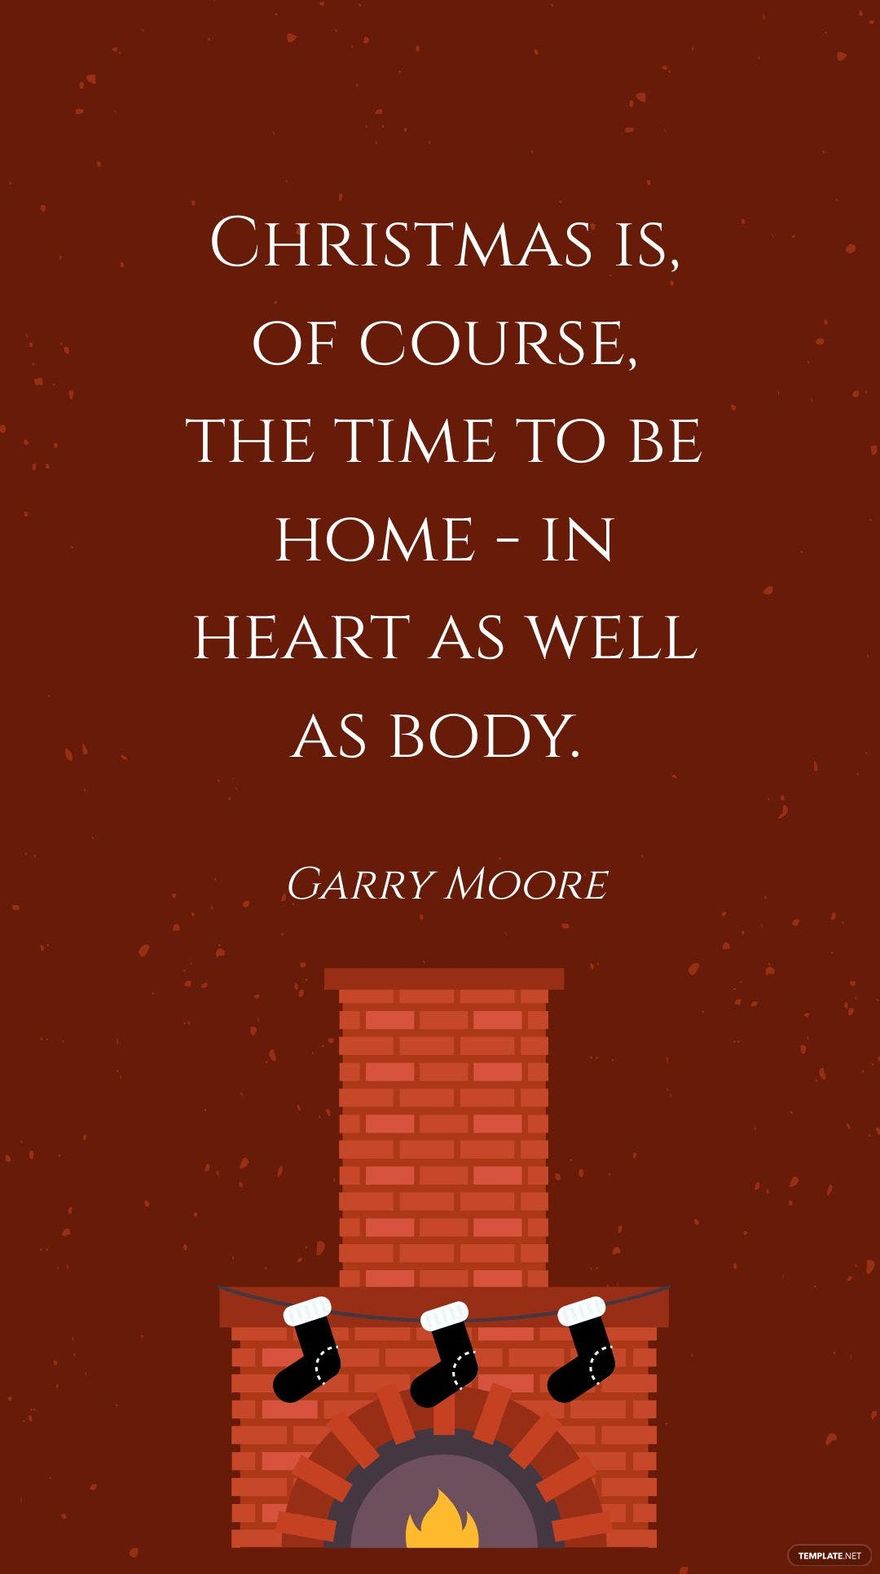 Free Garry Moore - Christmas is, of course, the time to be home - in heart as well as body. in JPG